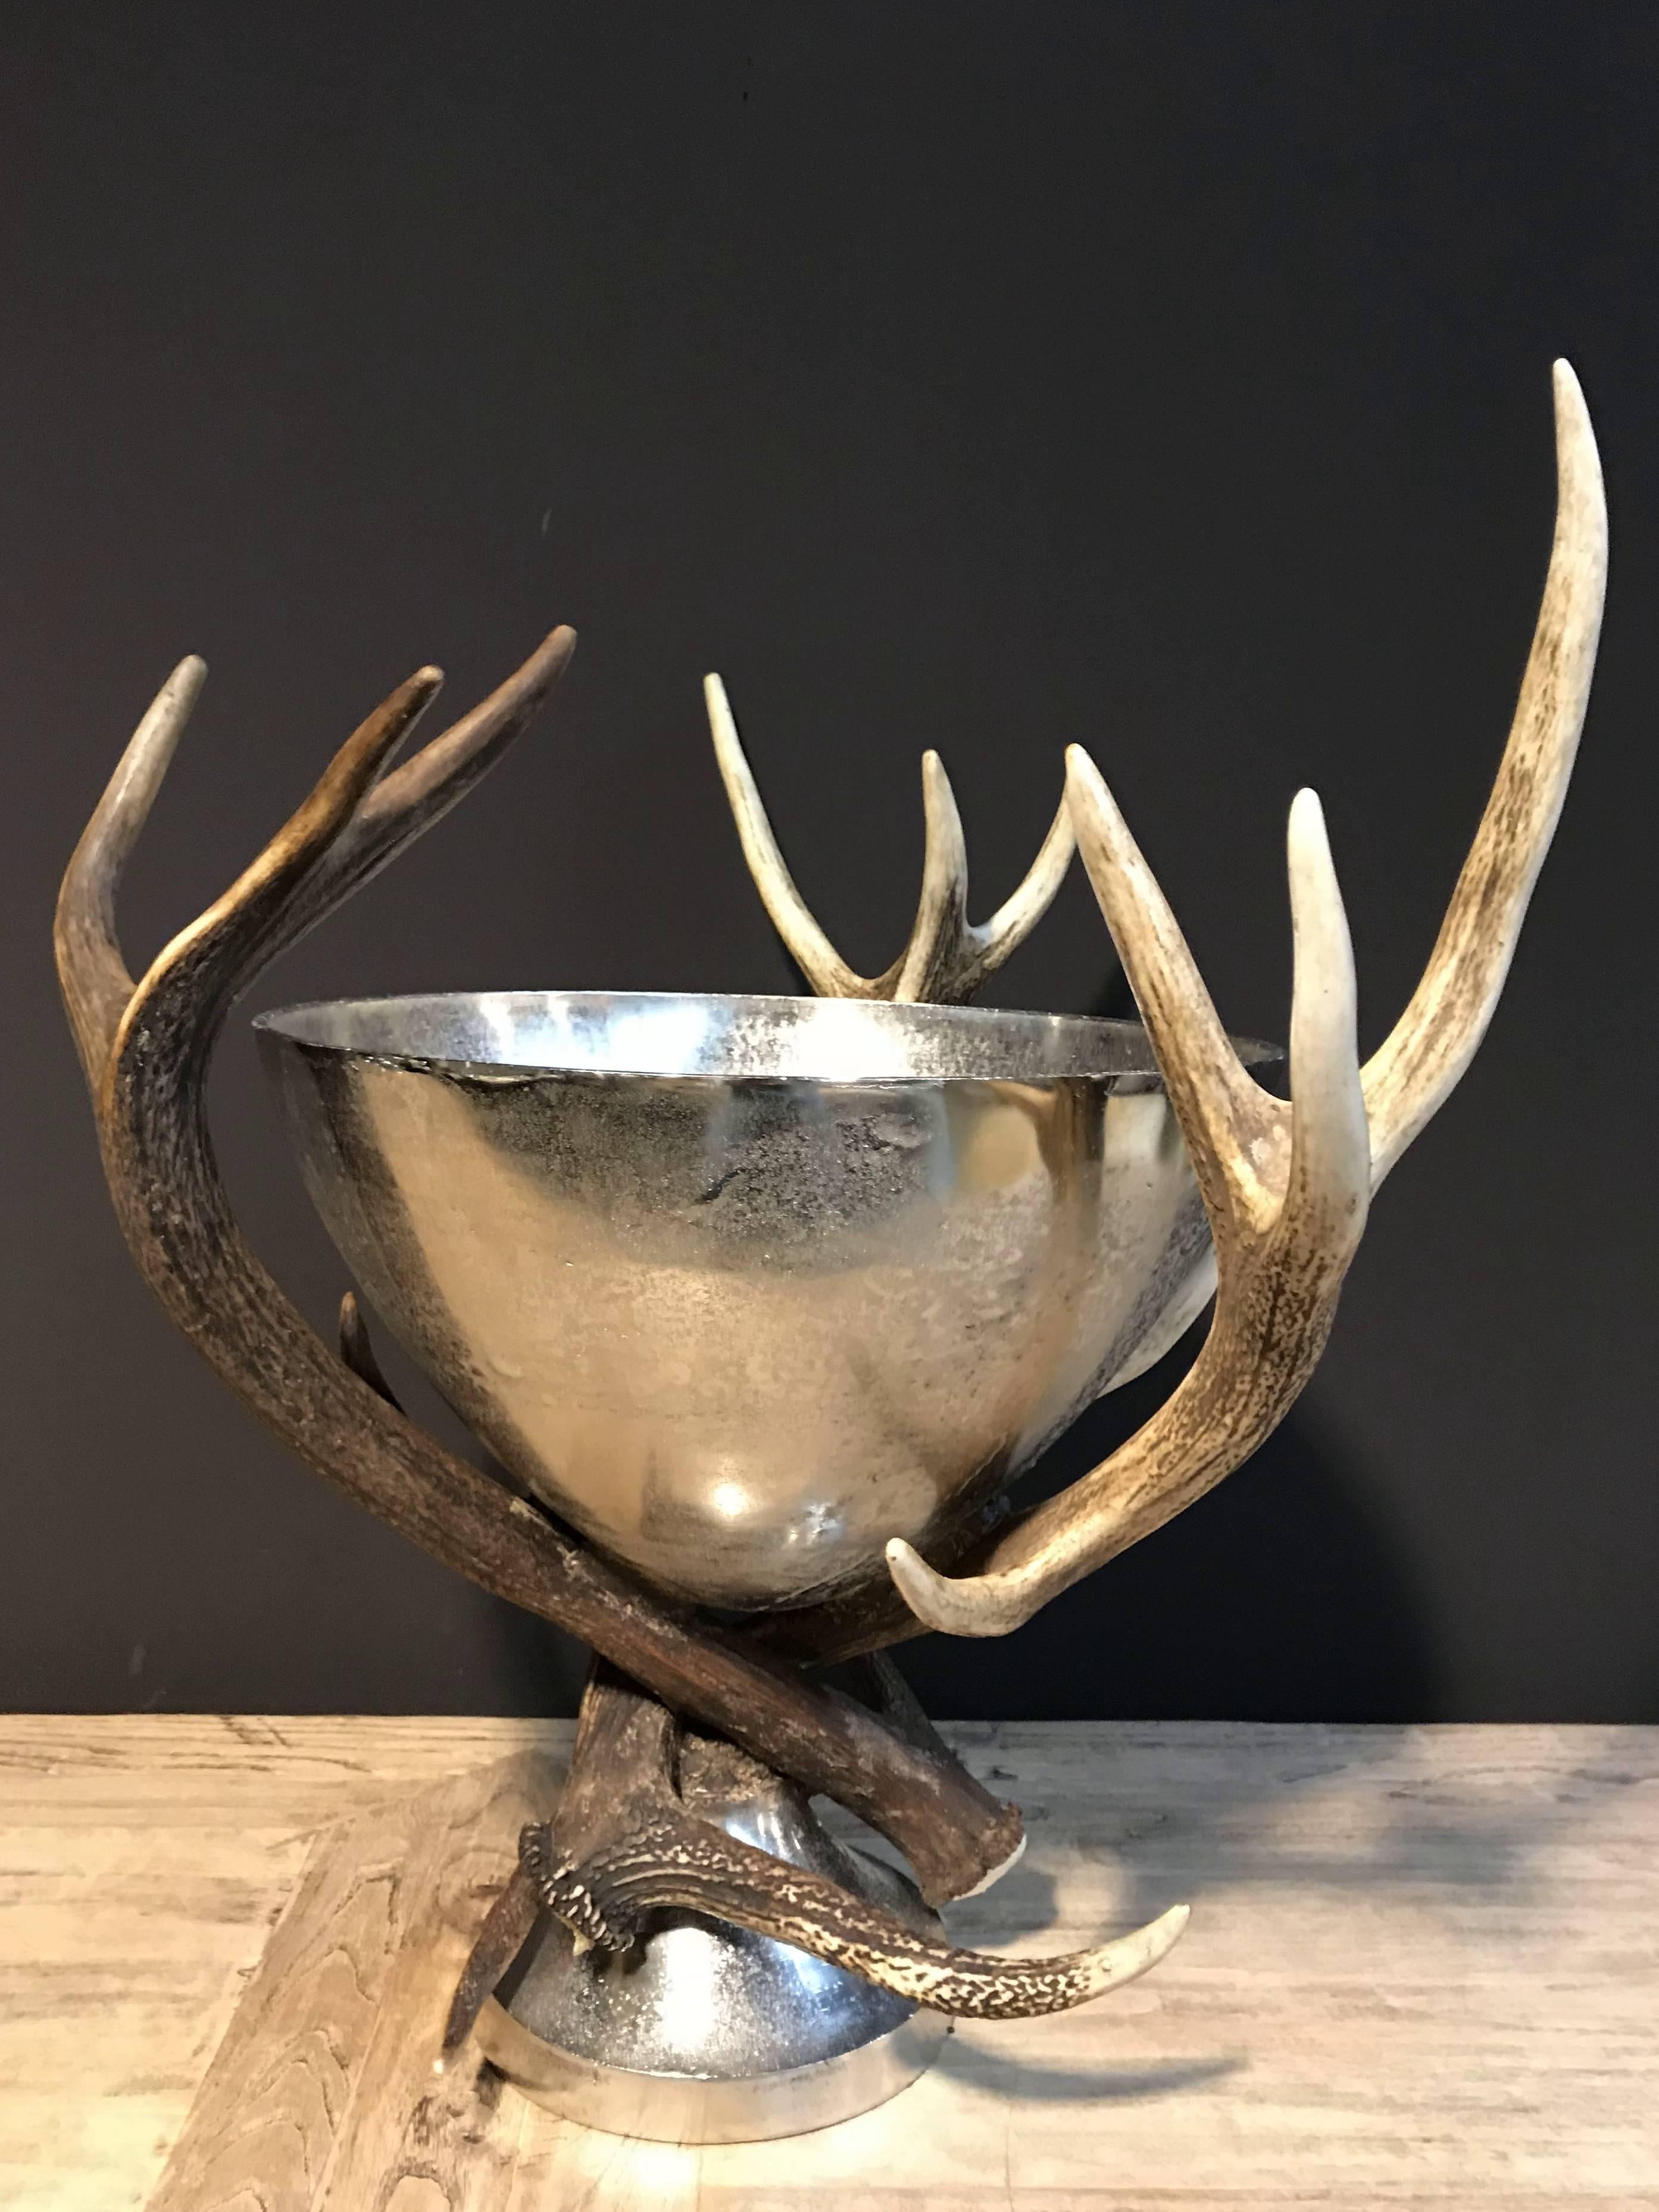 Champagne cooler made of red deer antlers, very decorative piece to fill up with ice and bottles of wine or champagne.